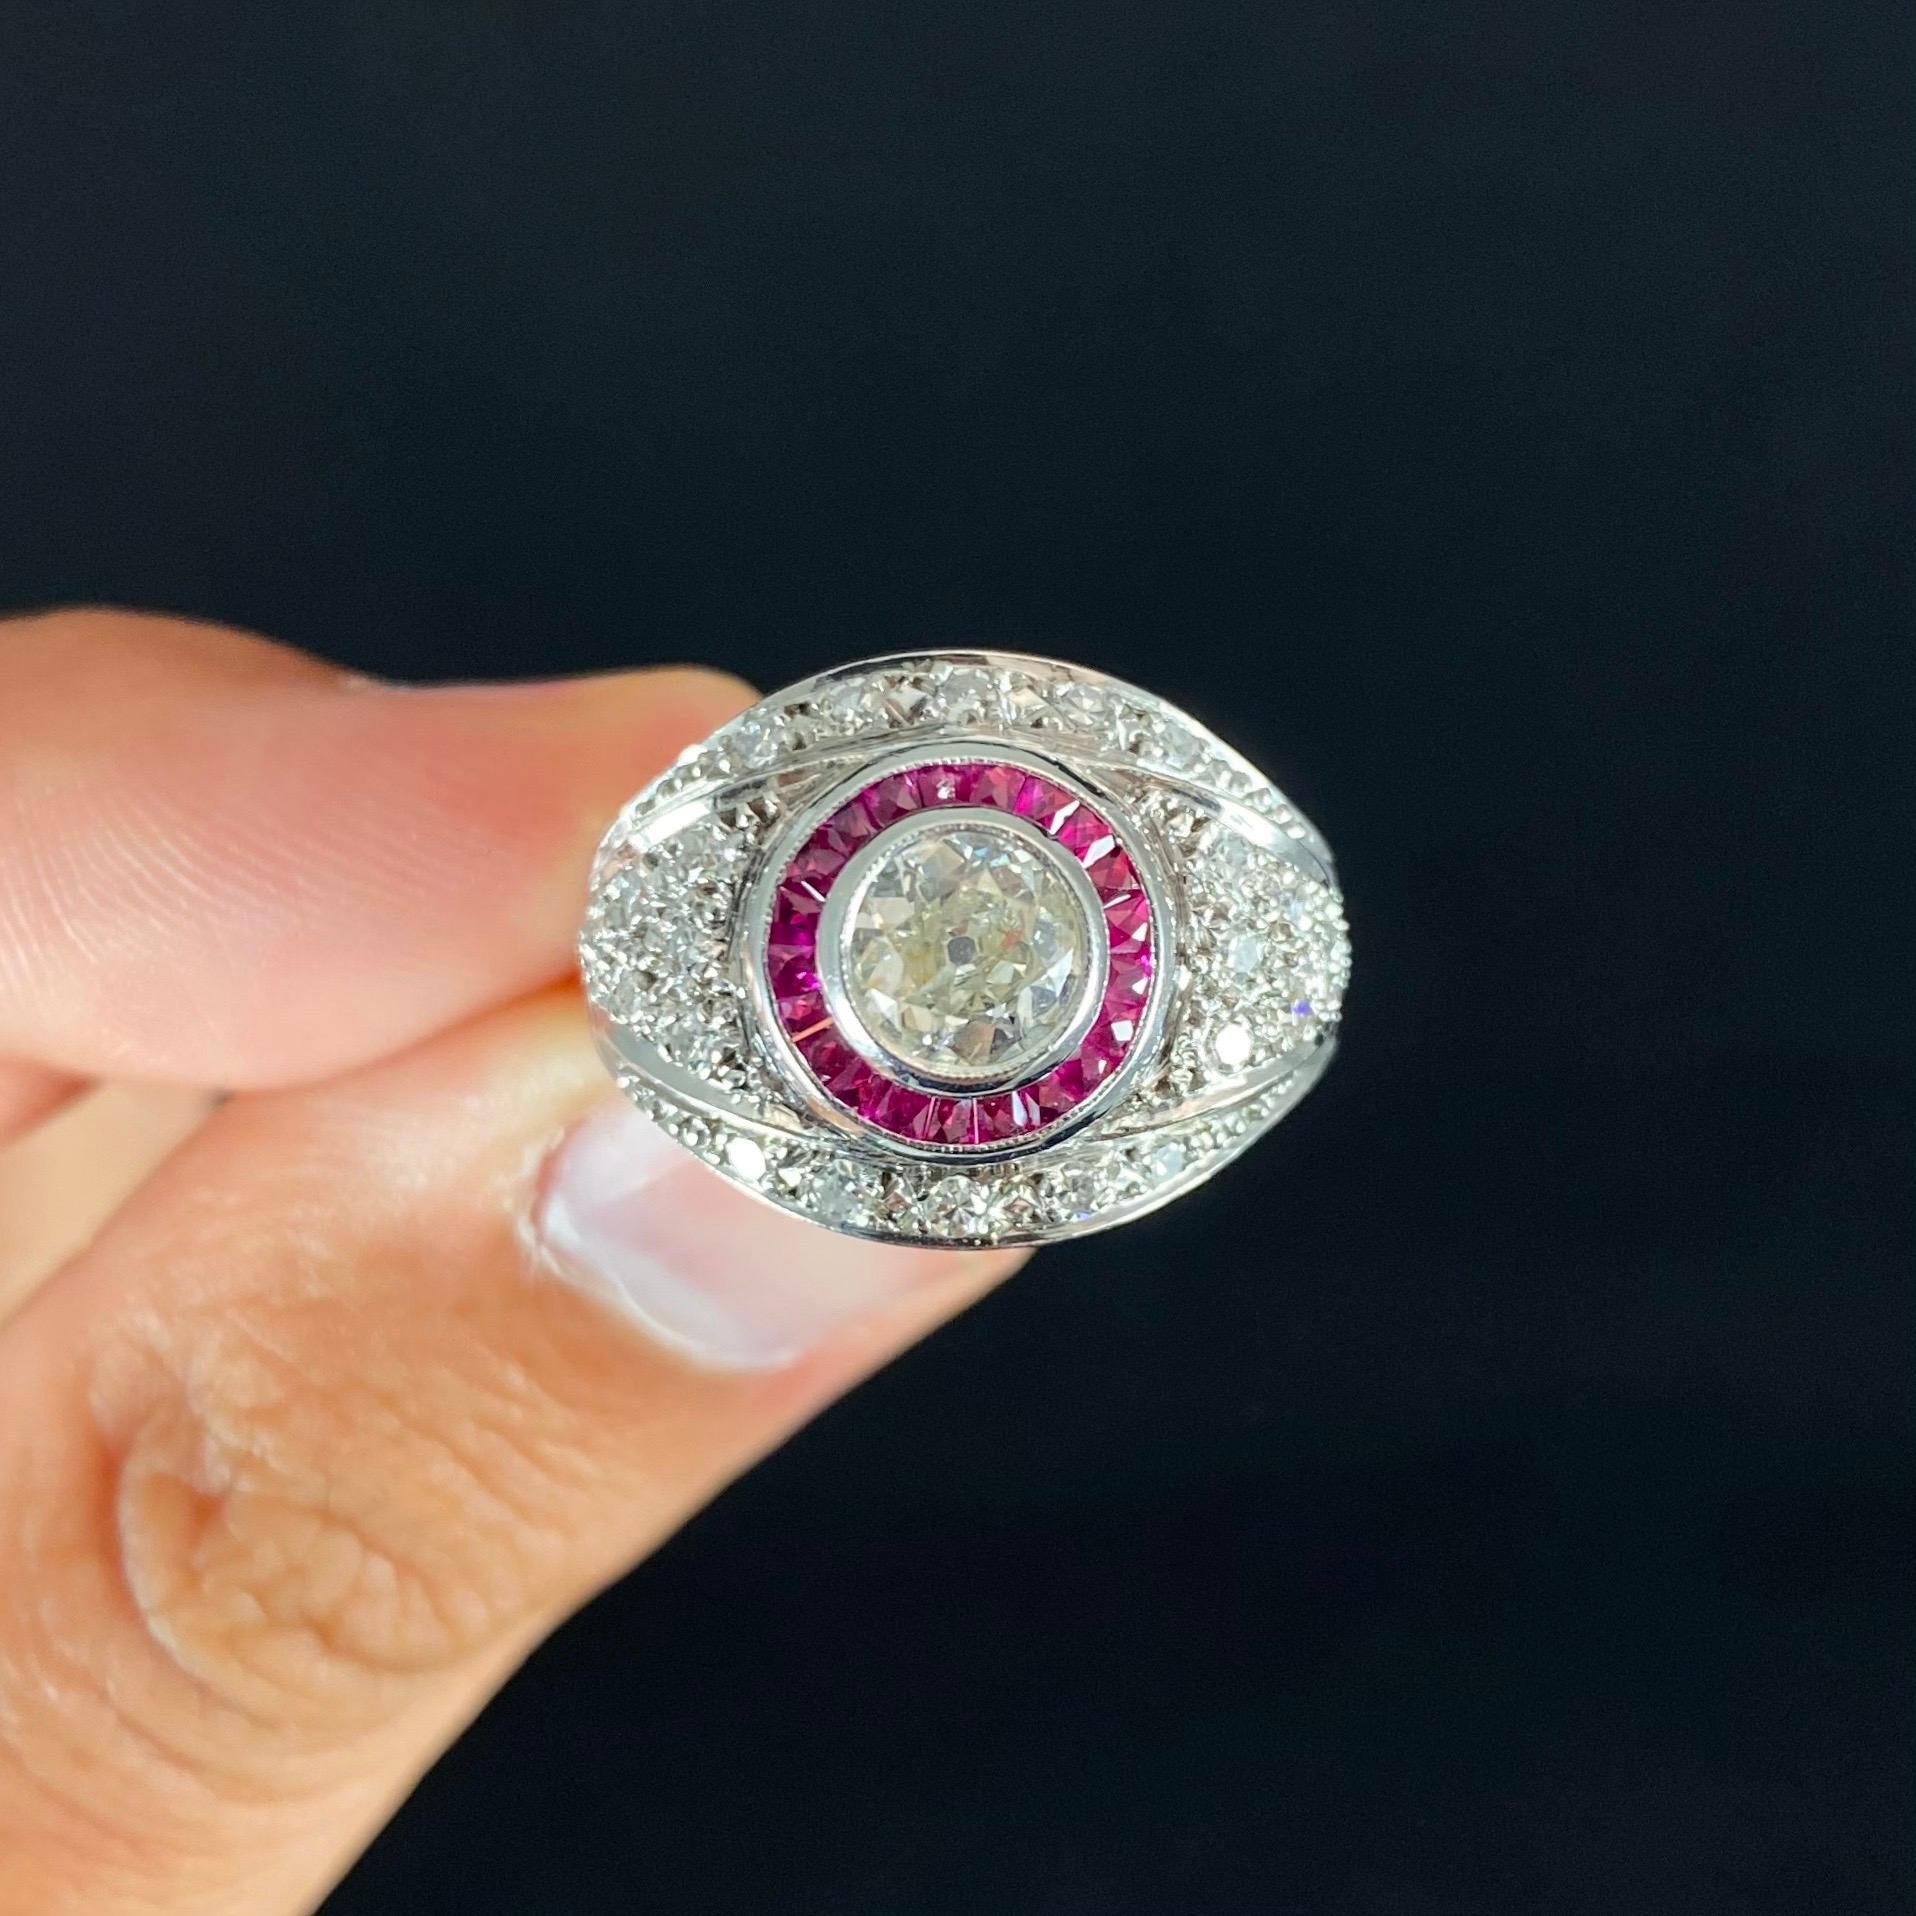 Art Deco style Old European brilliant-cut diamond and ruby bombe target engagement ring in 18 karat white gold, circa 1990. This ring of a target design very typical of high cocktail and dress jewelry from the 1920s and 1930s features an Old